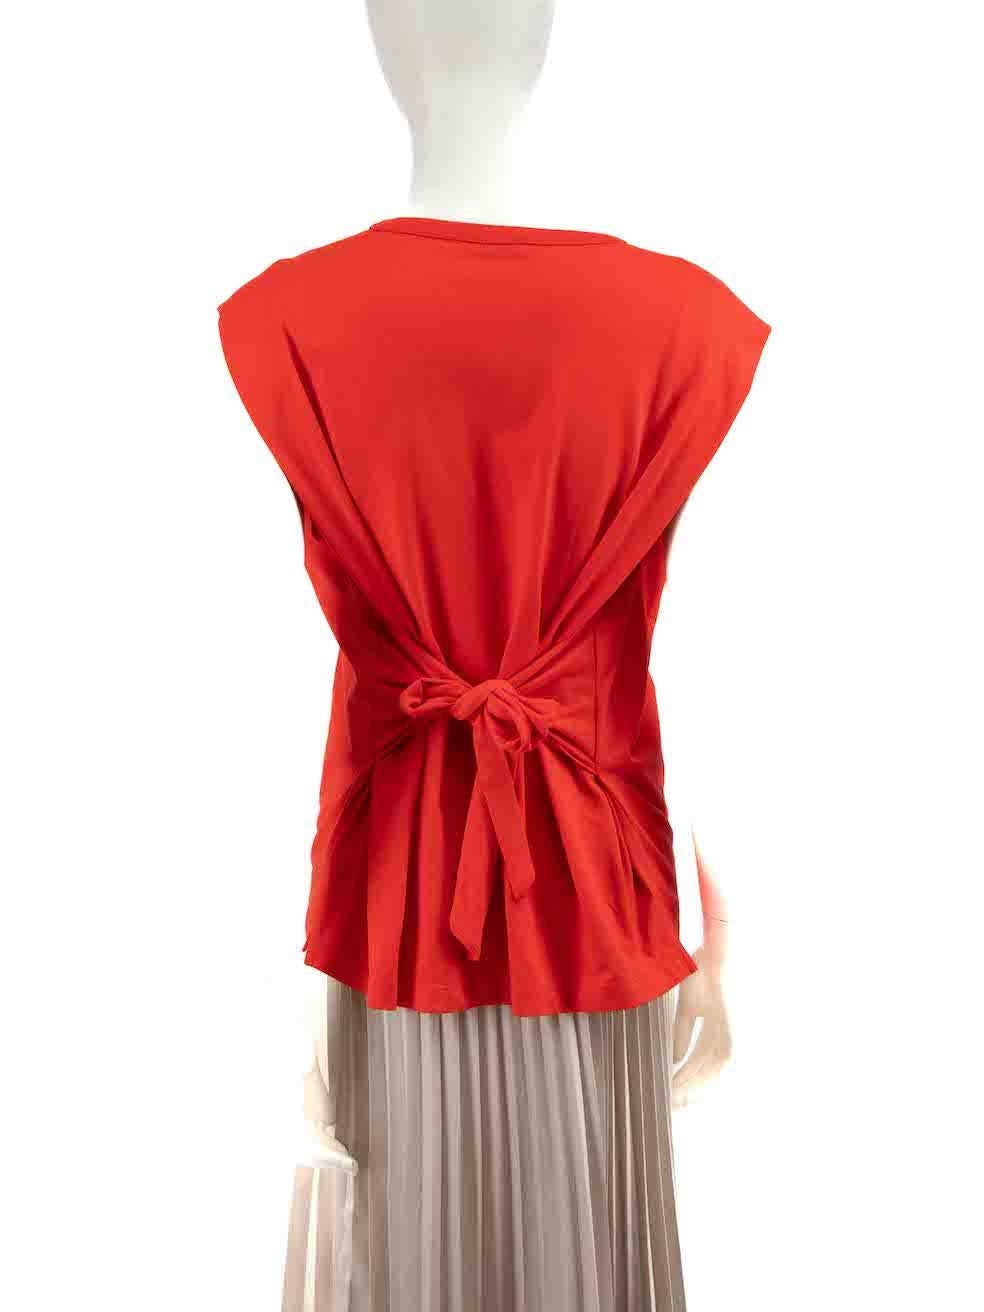 Sandro Red Sleeveless Tie Waist Top Size S In Good Condition For Sale In London, GB